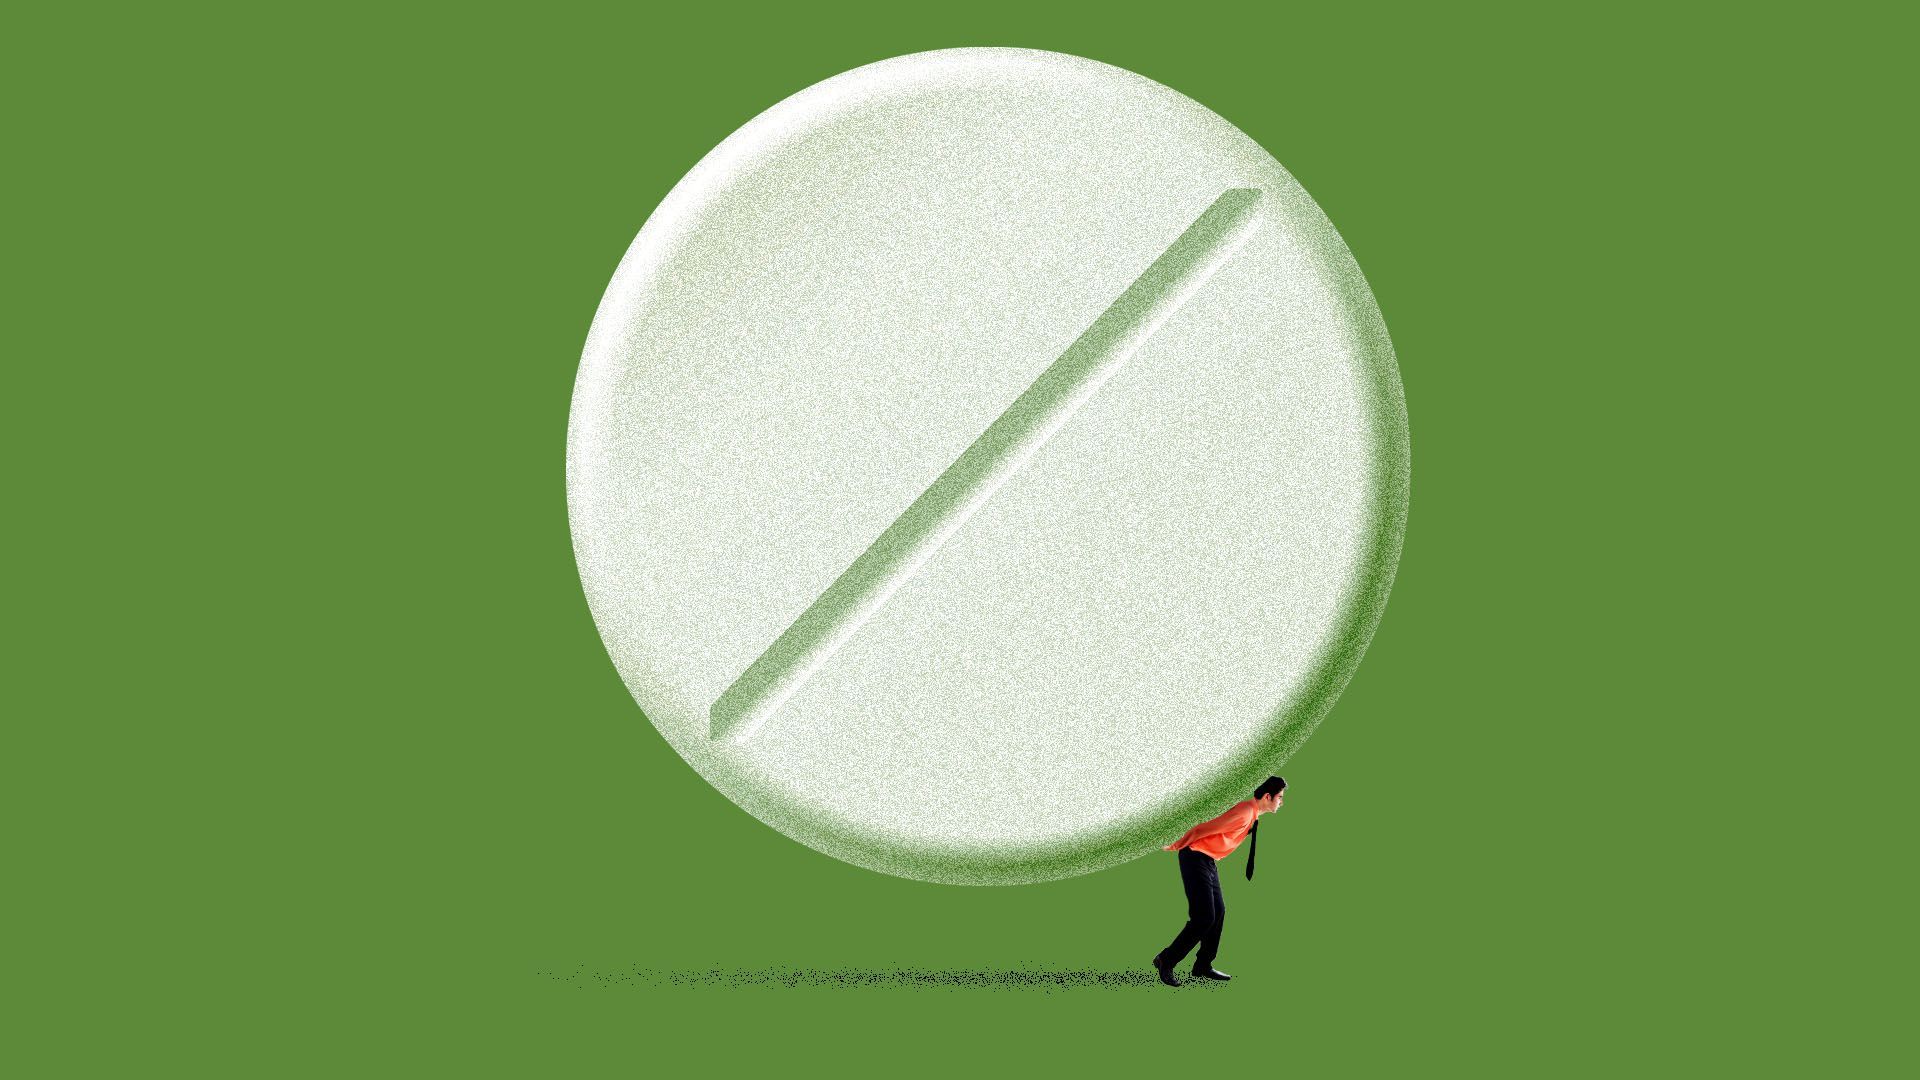 Illustration of a small employer carrying a giant pill on his back